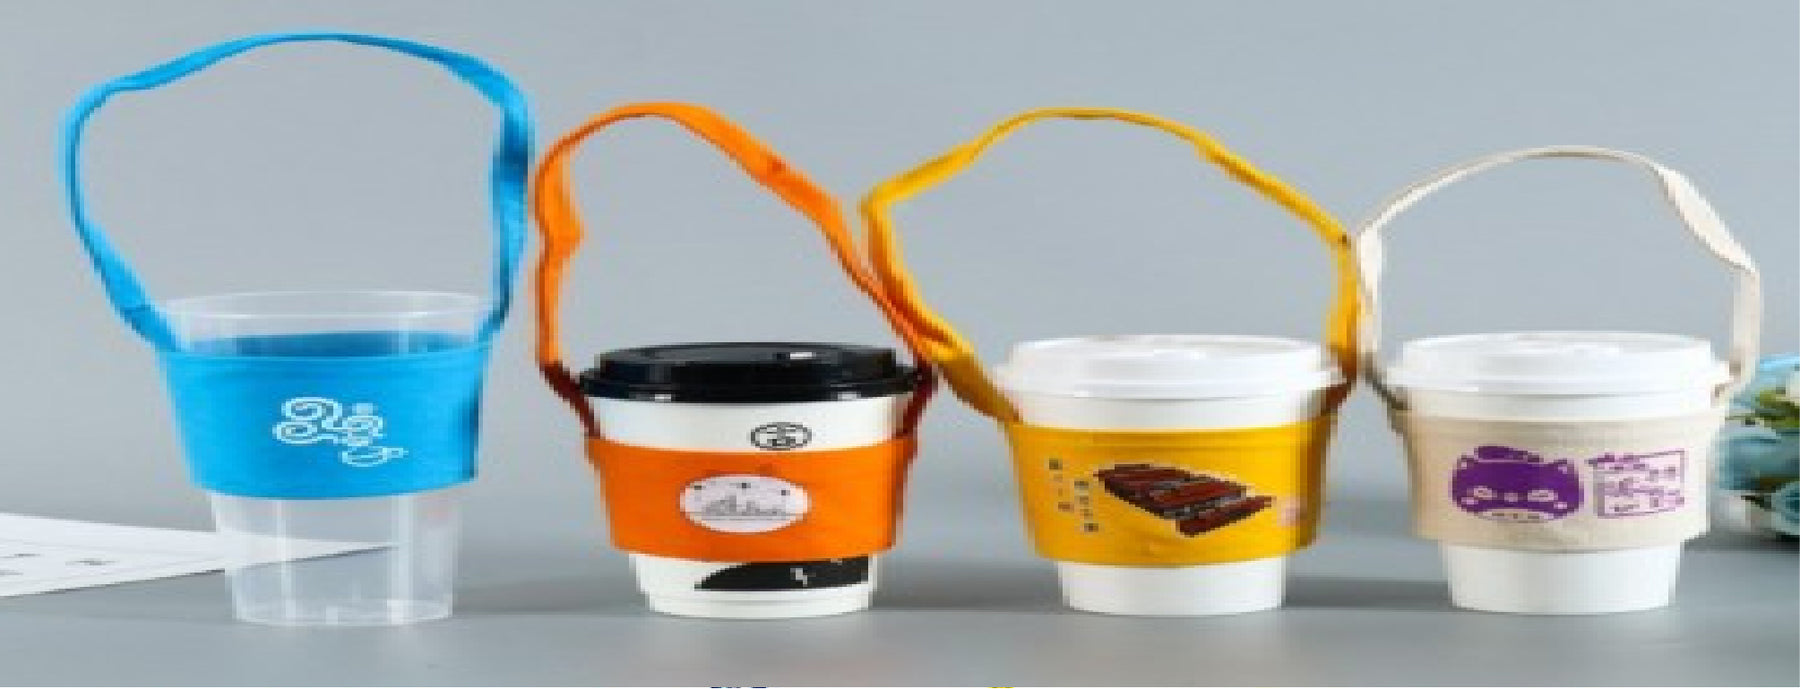 Packman: Food Packaging: Difference between a cup carrier & a cup holder